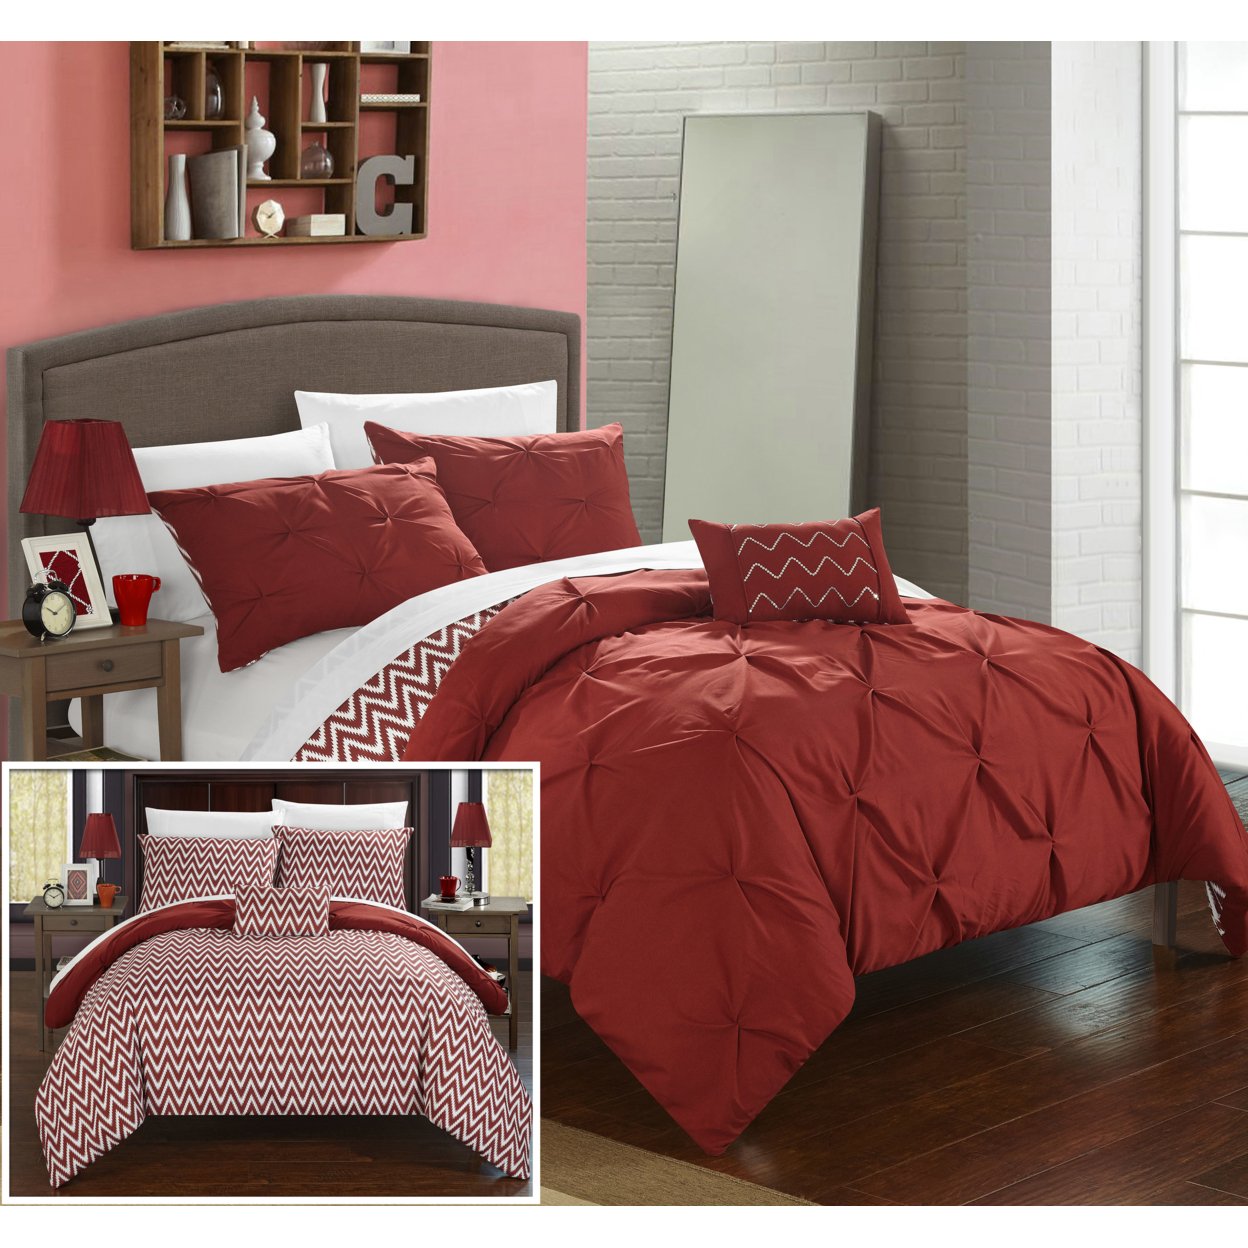 Chic Home 3/4 Piece Portia Pinch Pleated, REVERSIBLE Chevron Print Ruffled And Pleated Comforter Set Shams And Decorative Pillows - Brick, T